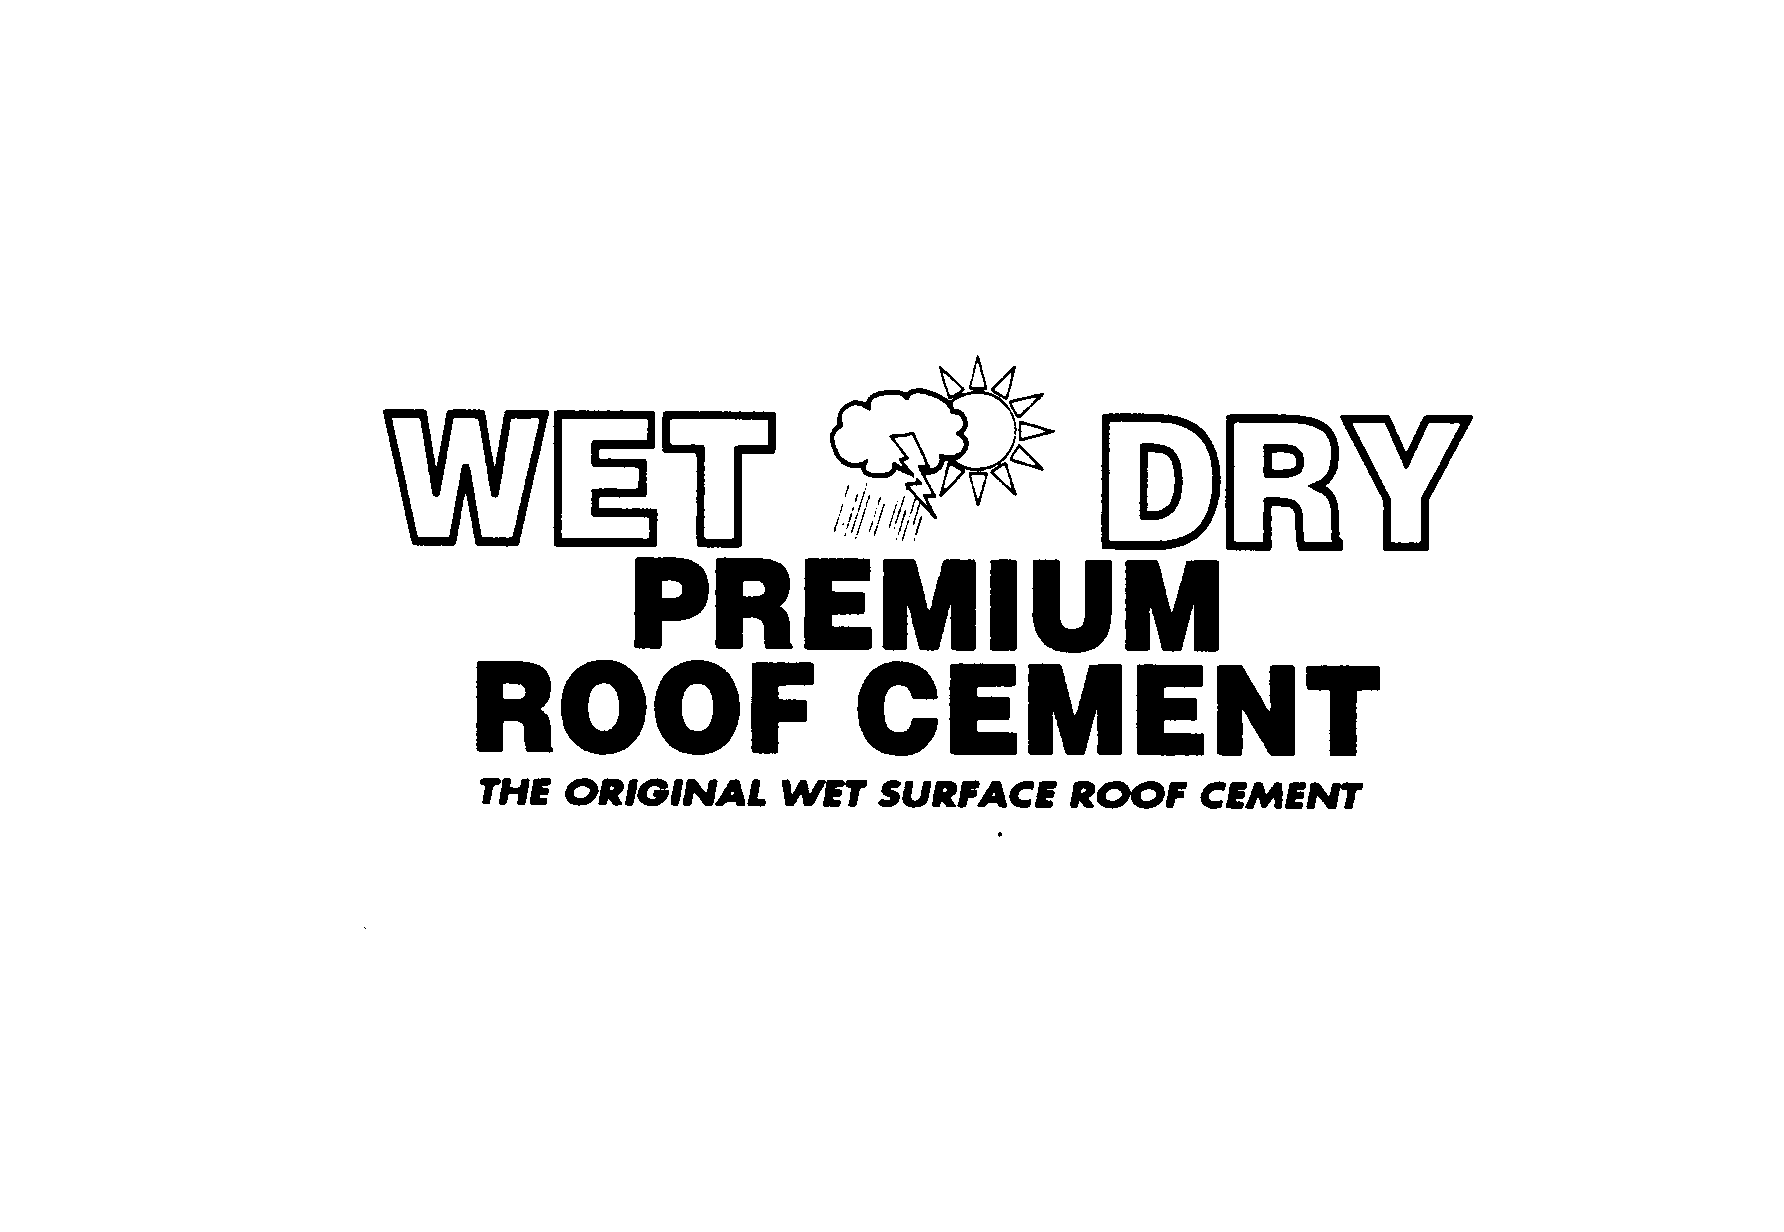  WET DRY PREMIUM ROOF CEMENT THE ORIGINAL WET SURFACE ROOF CEMENT